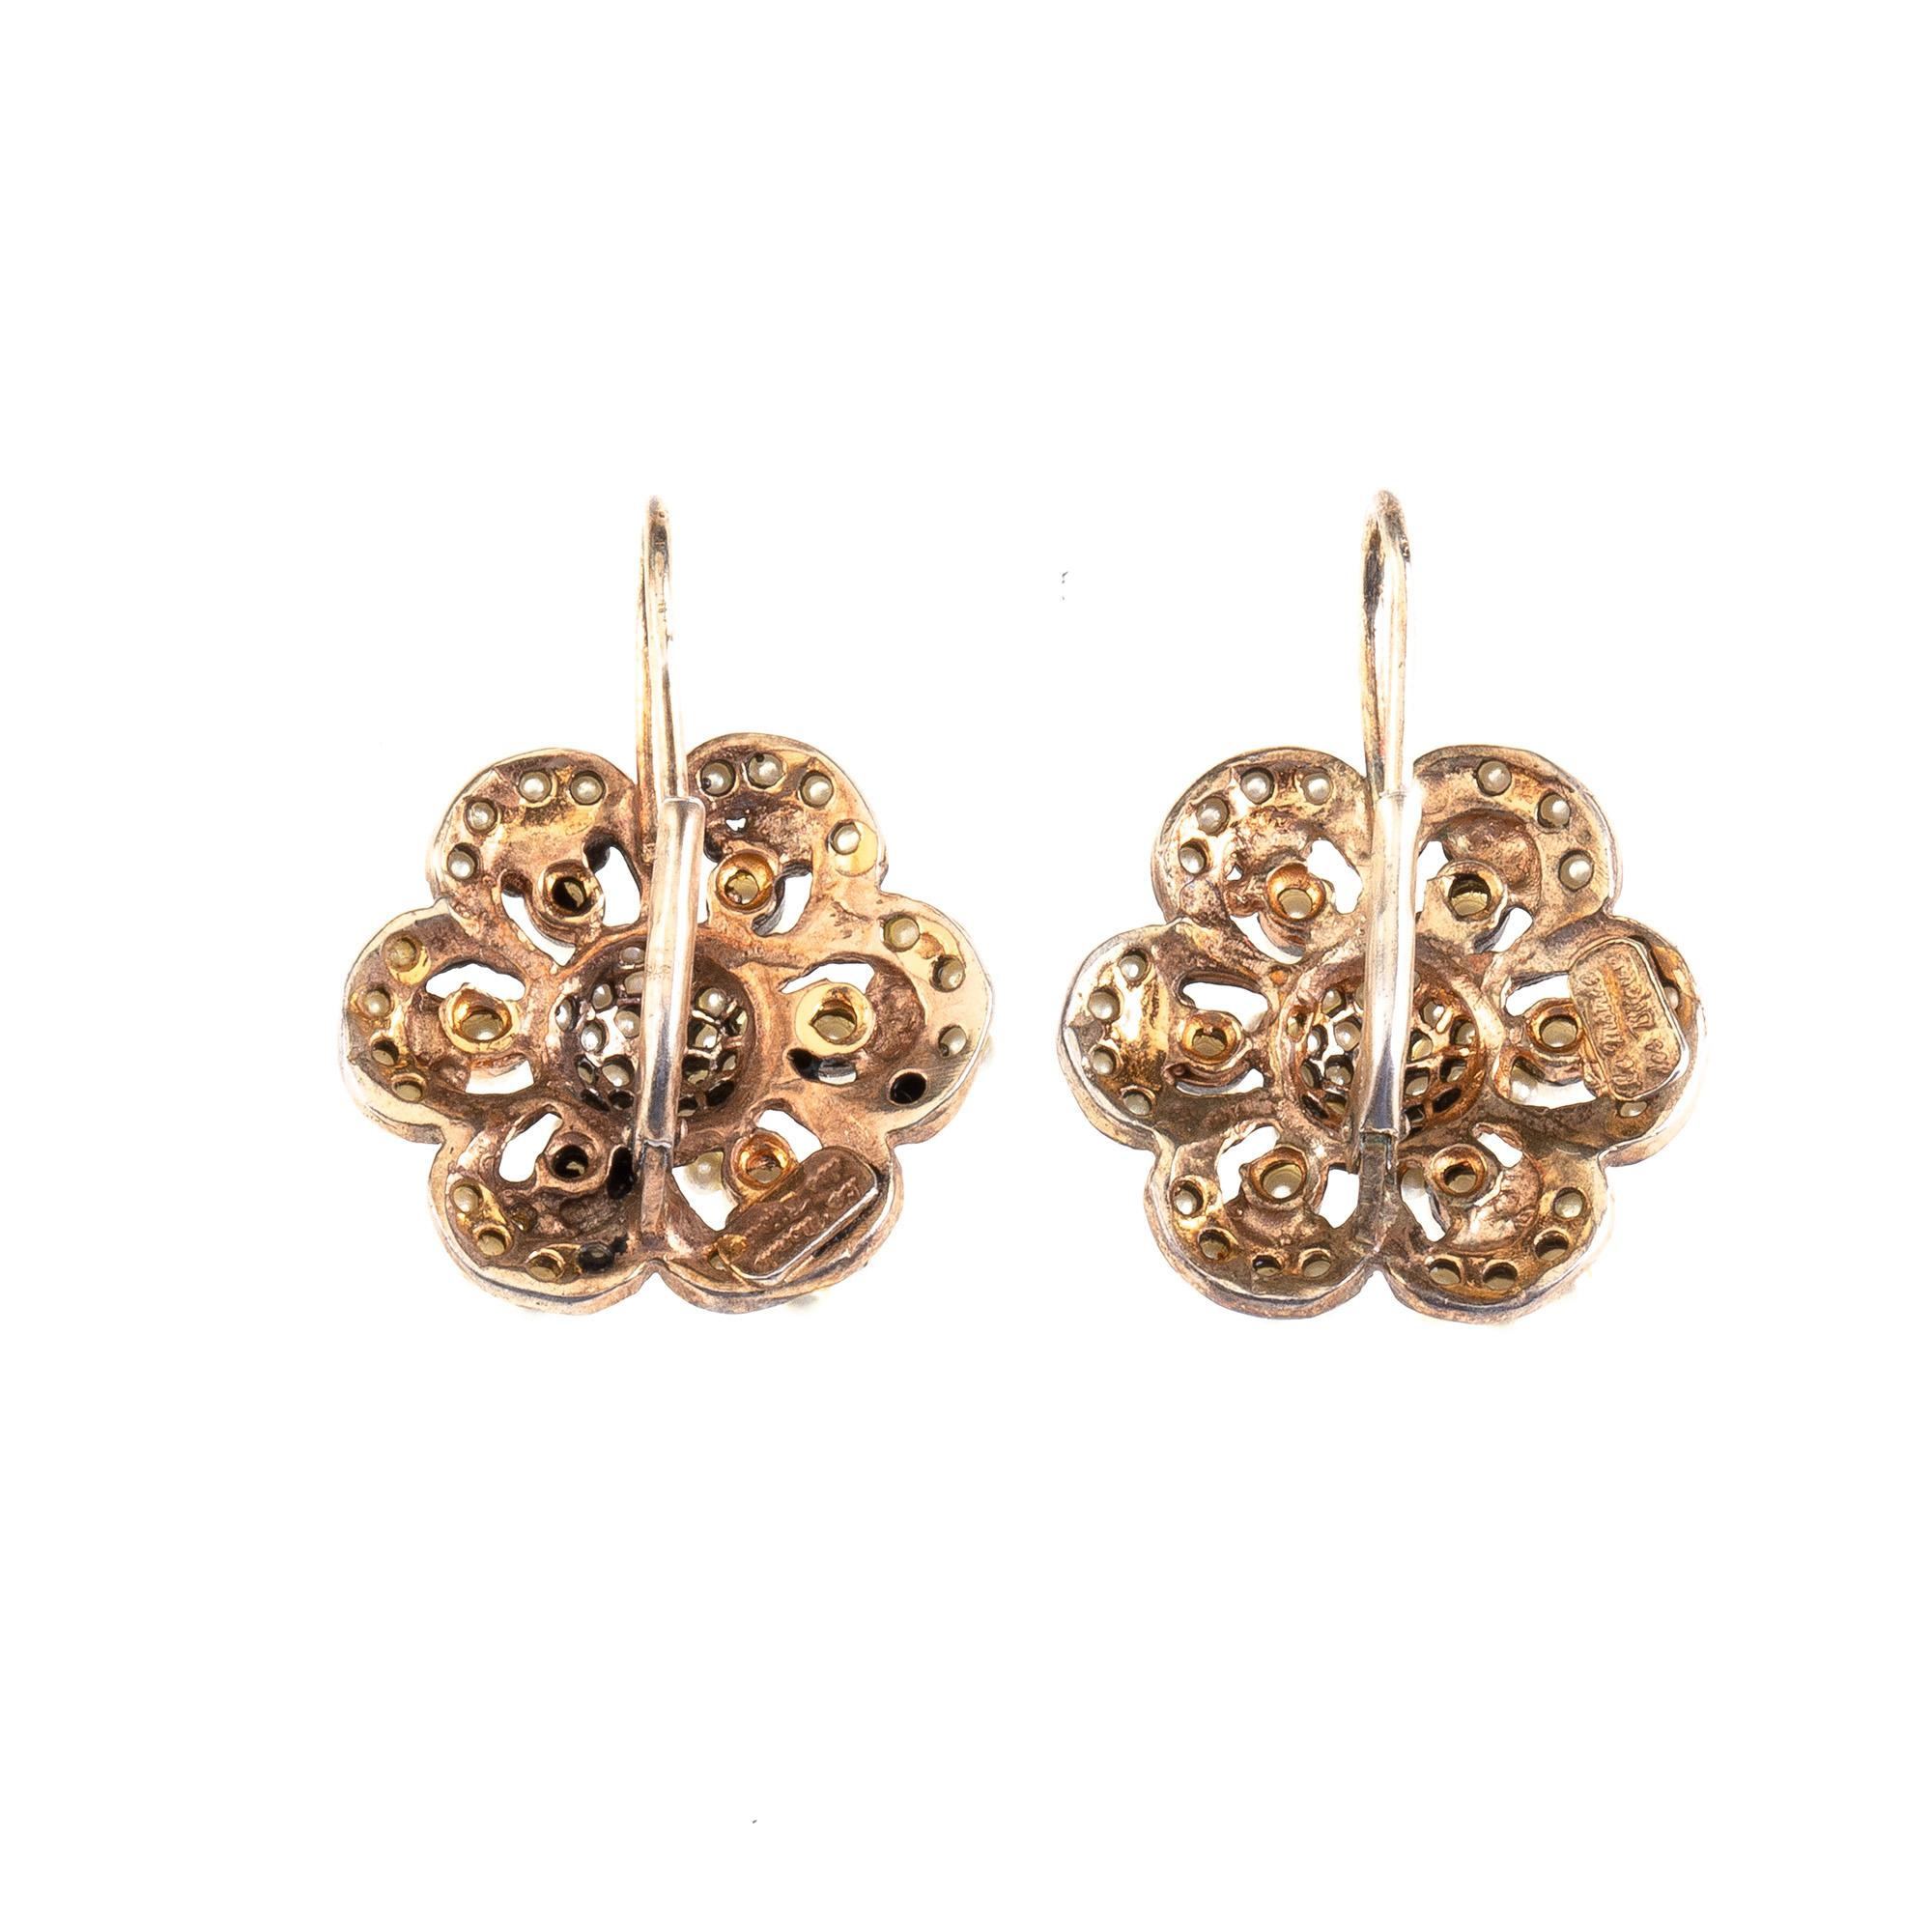 Natural Pearl Gold Silver Flower Earrings.
All Giulia Colussi jewelry is new and has never been previously owned or worn. Each item will arrive at your door beautifully gift wrapped in our boxes, put inside an elegant pouch or jewel box.
